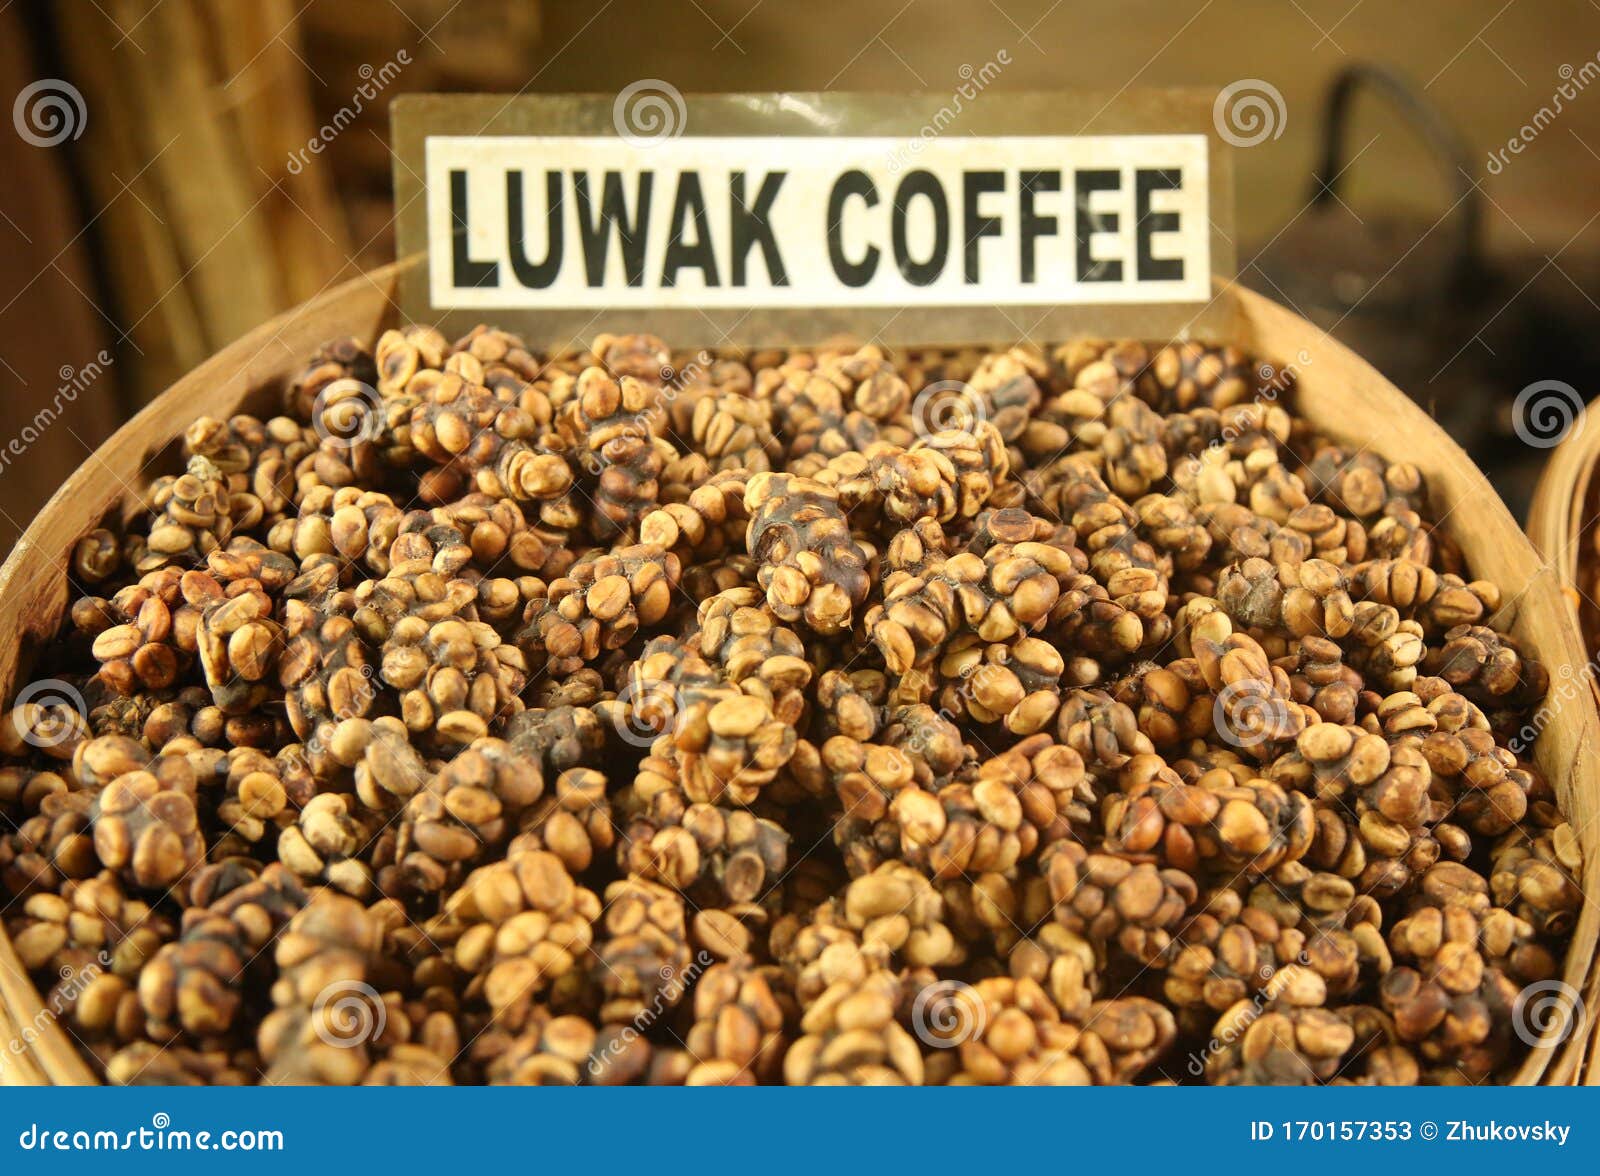 Kopi Luwak Or Civet Coffee Is One Of The World S Most Expensive And Low Production Varieties Of Coffee Stock Image Image Of Heap Berry 170157353